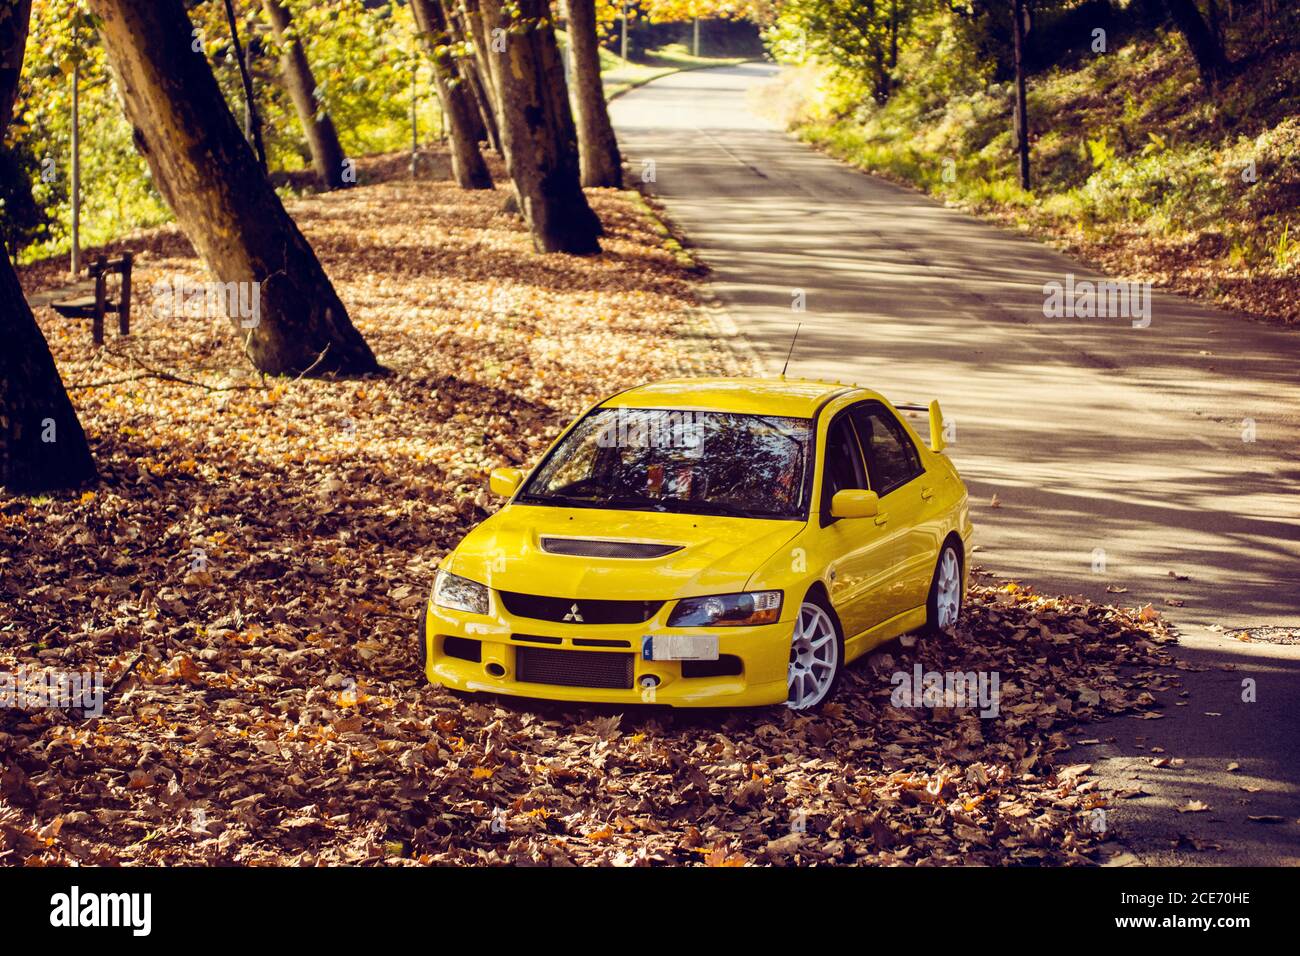 Mitsubishi Lancer Evolution 9 Shot In A Mountain Road Full Of Autumn Leaves Stock Photo Alamy